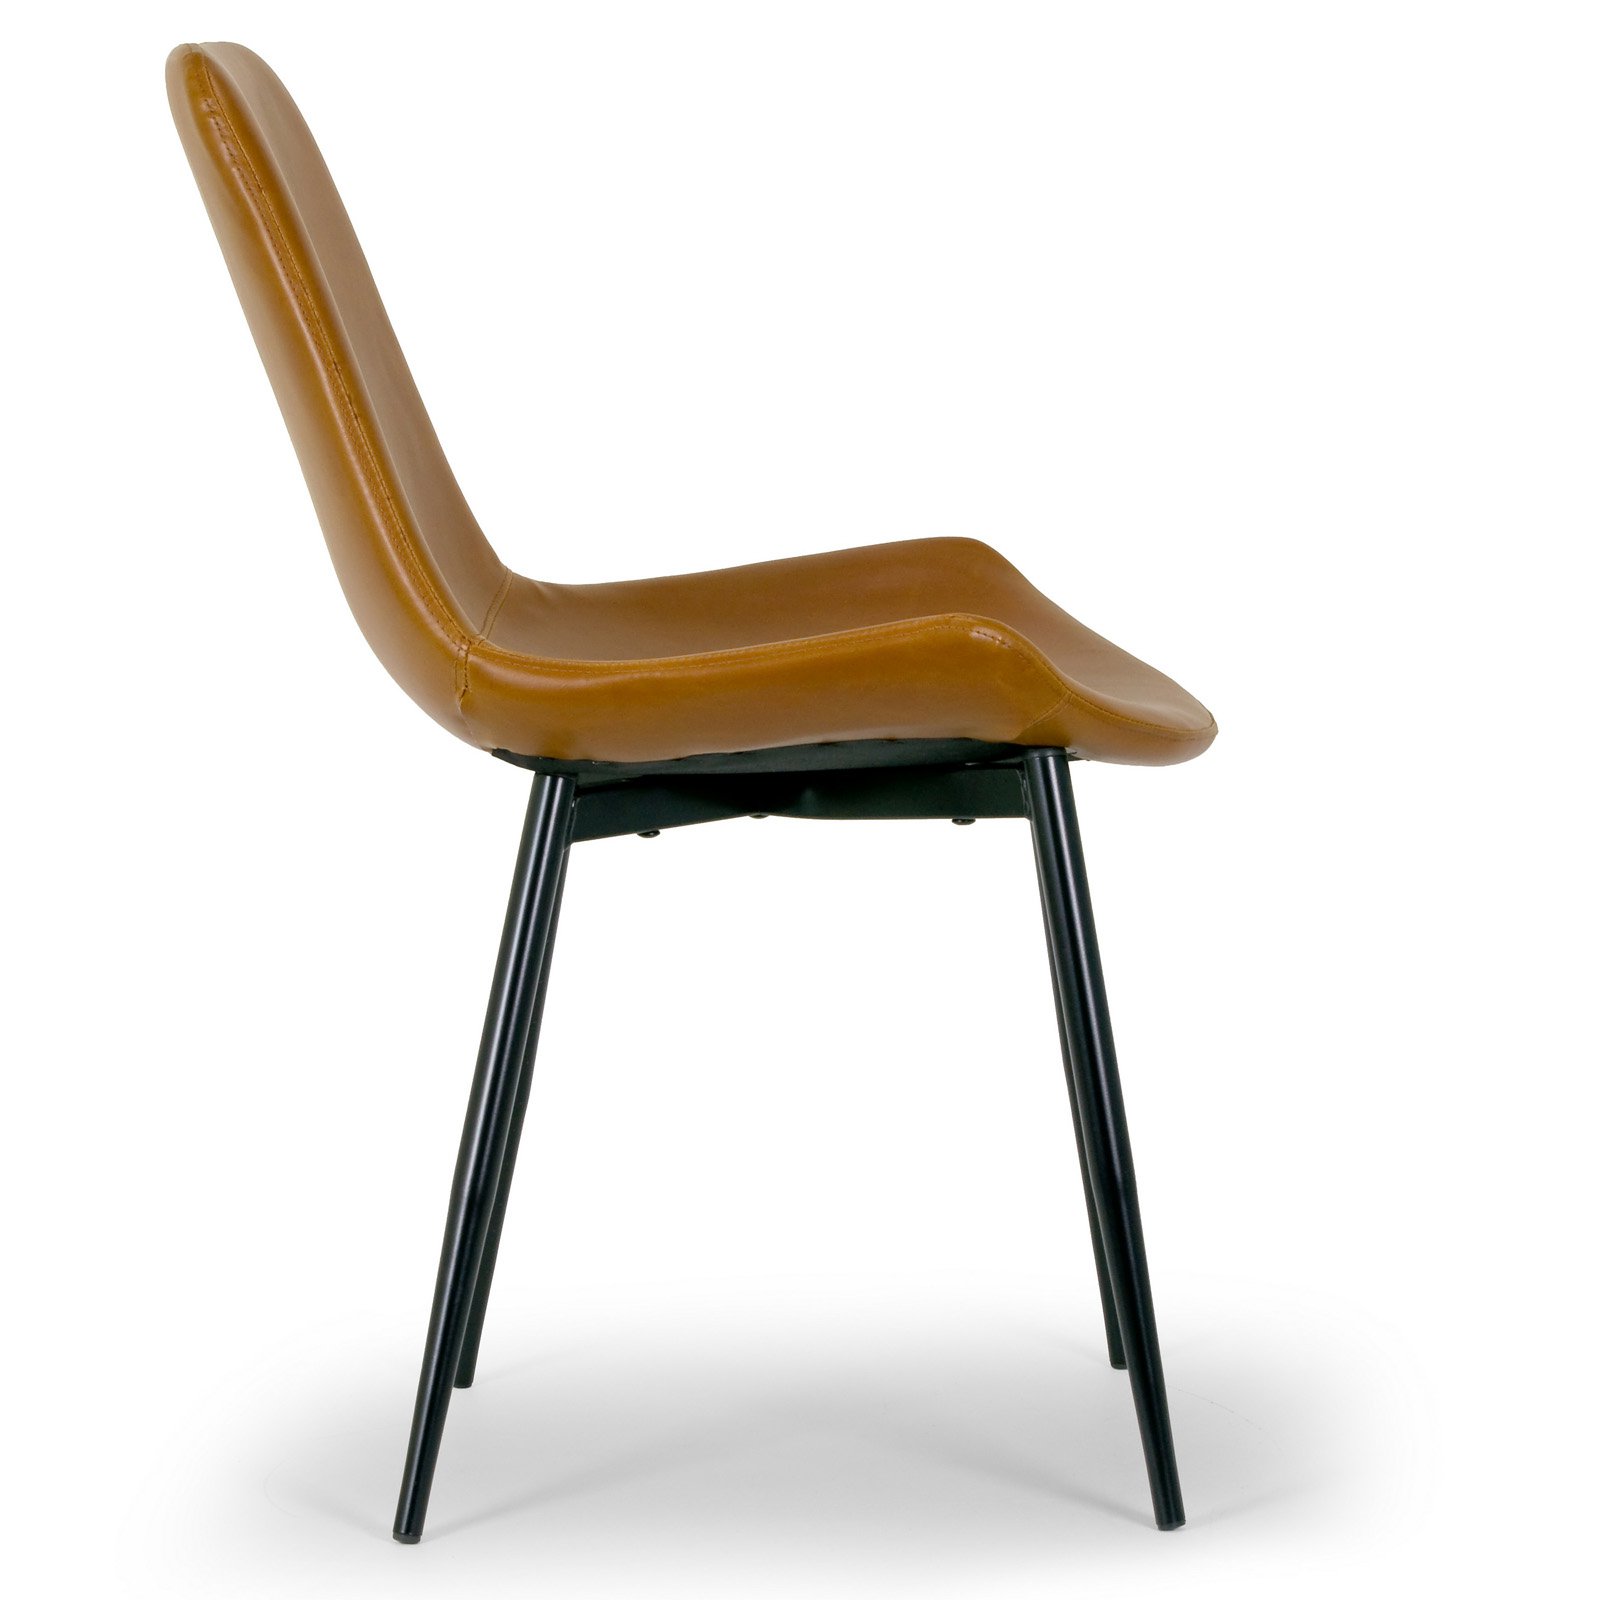 Set of 2 Alary Caramel Brown Faux Leather Modern Dining Chair with Black Iron Legs - image 3 of 6